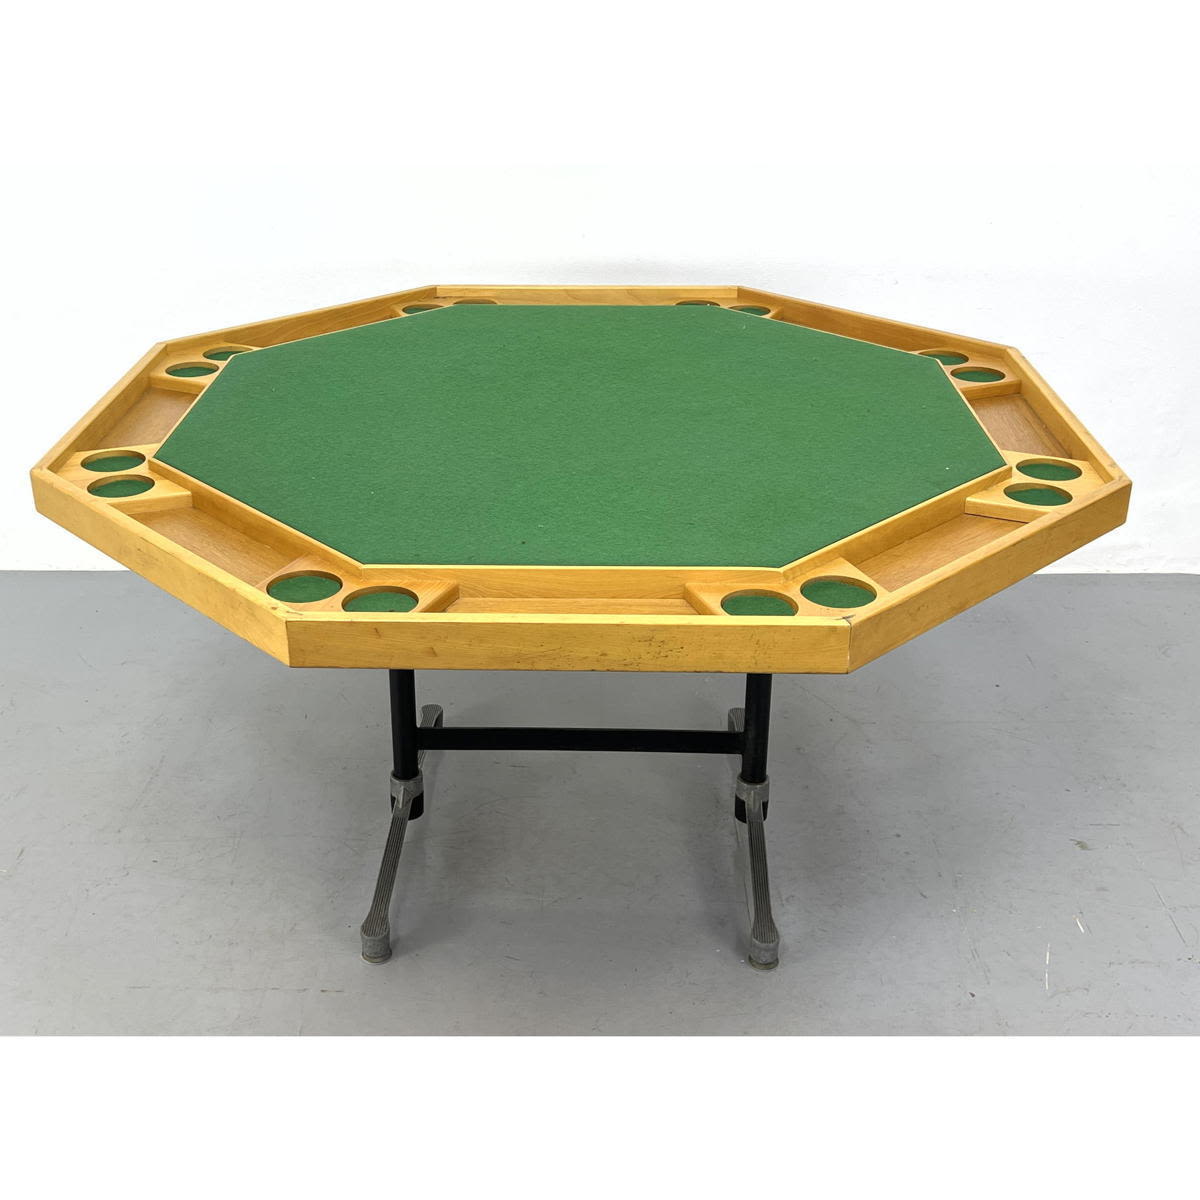 Octagonal Game Table. Blond Wood Frame